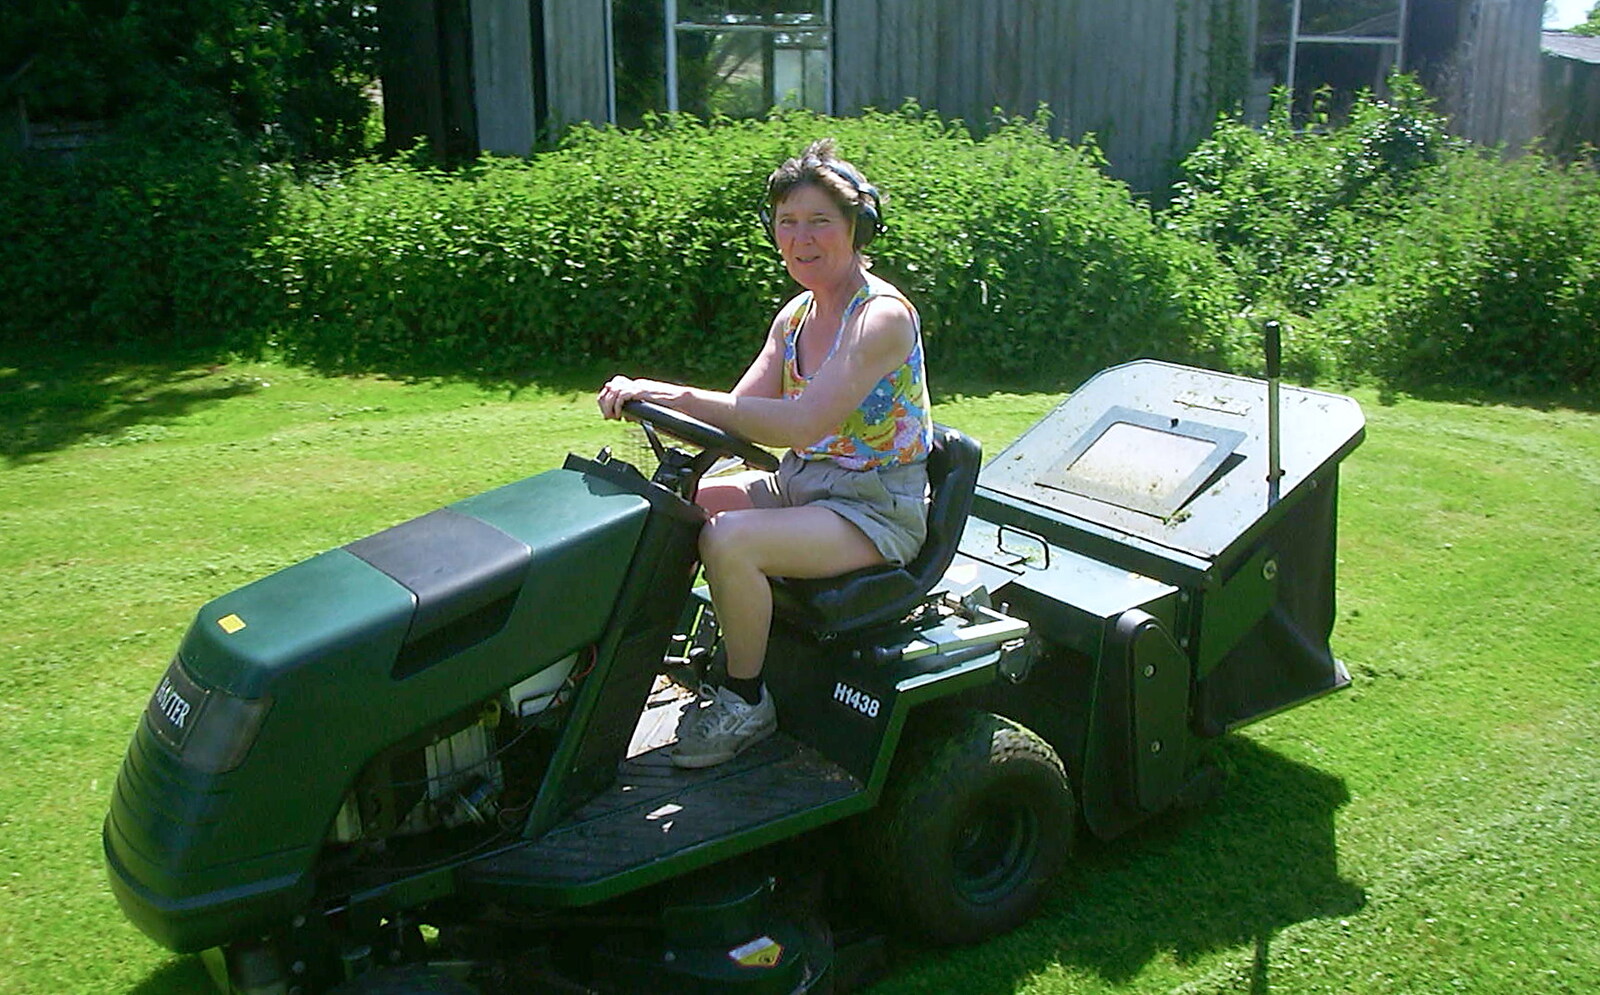 The BSCC at the Victoria, Earl Soham, Suffolk - 27th May 2002: Brenda mows the lawn on a ride-on Hayter